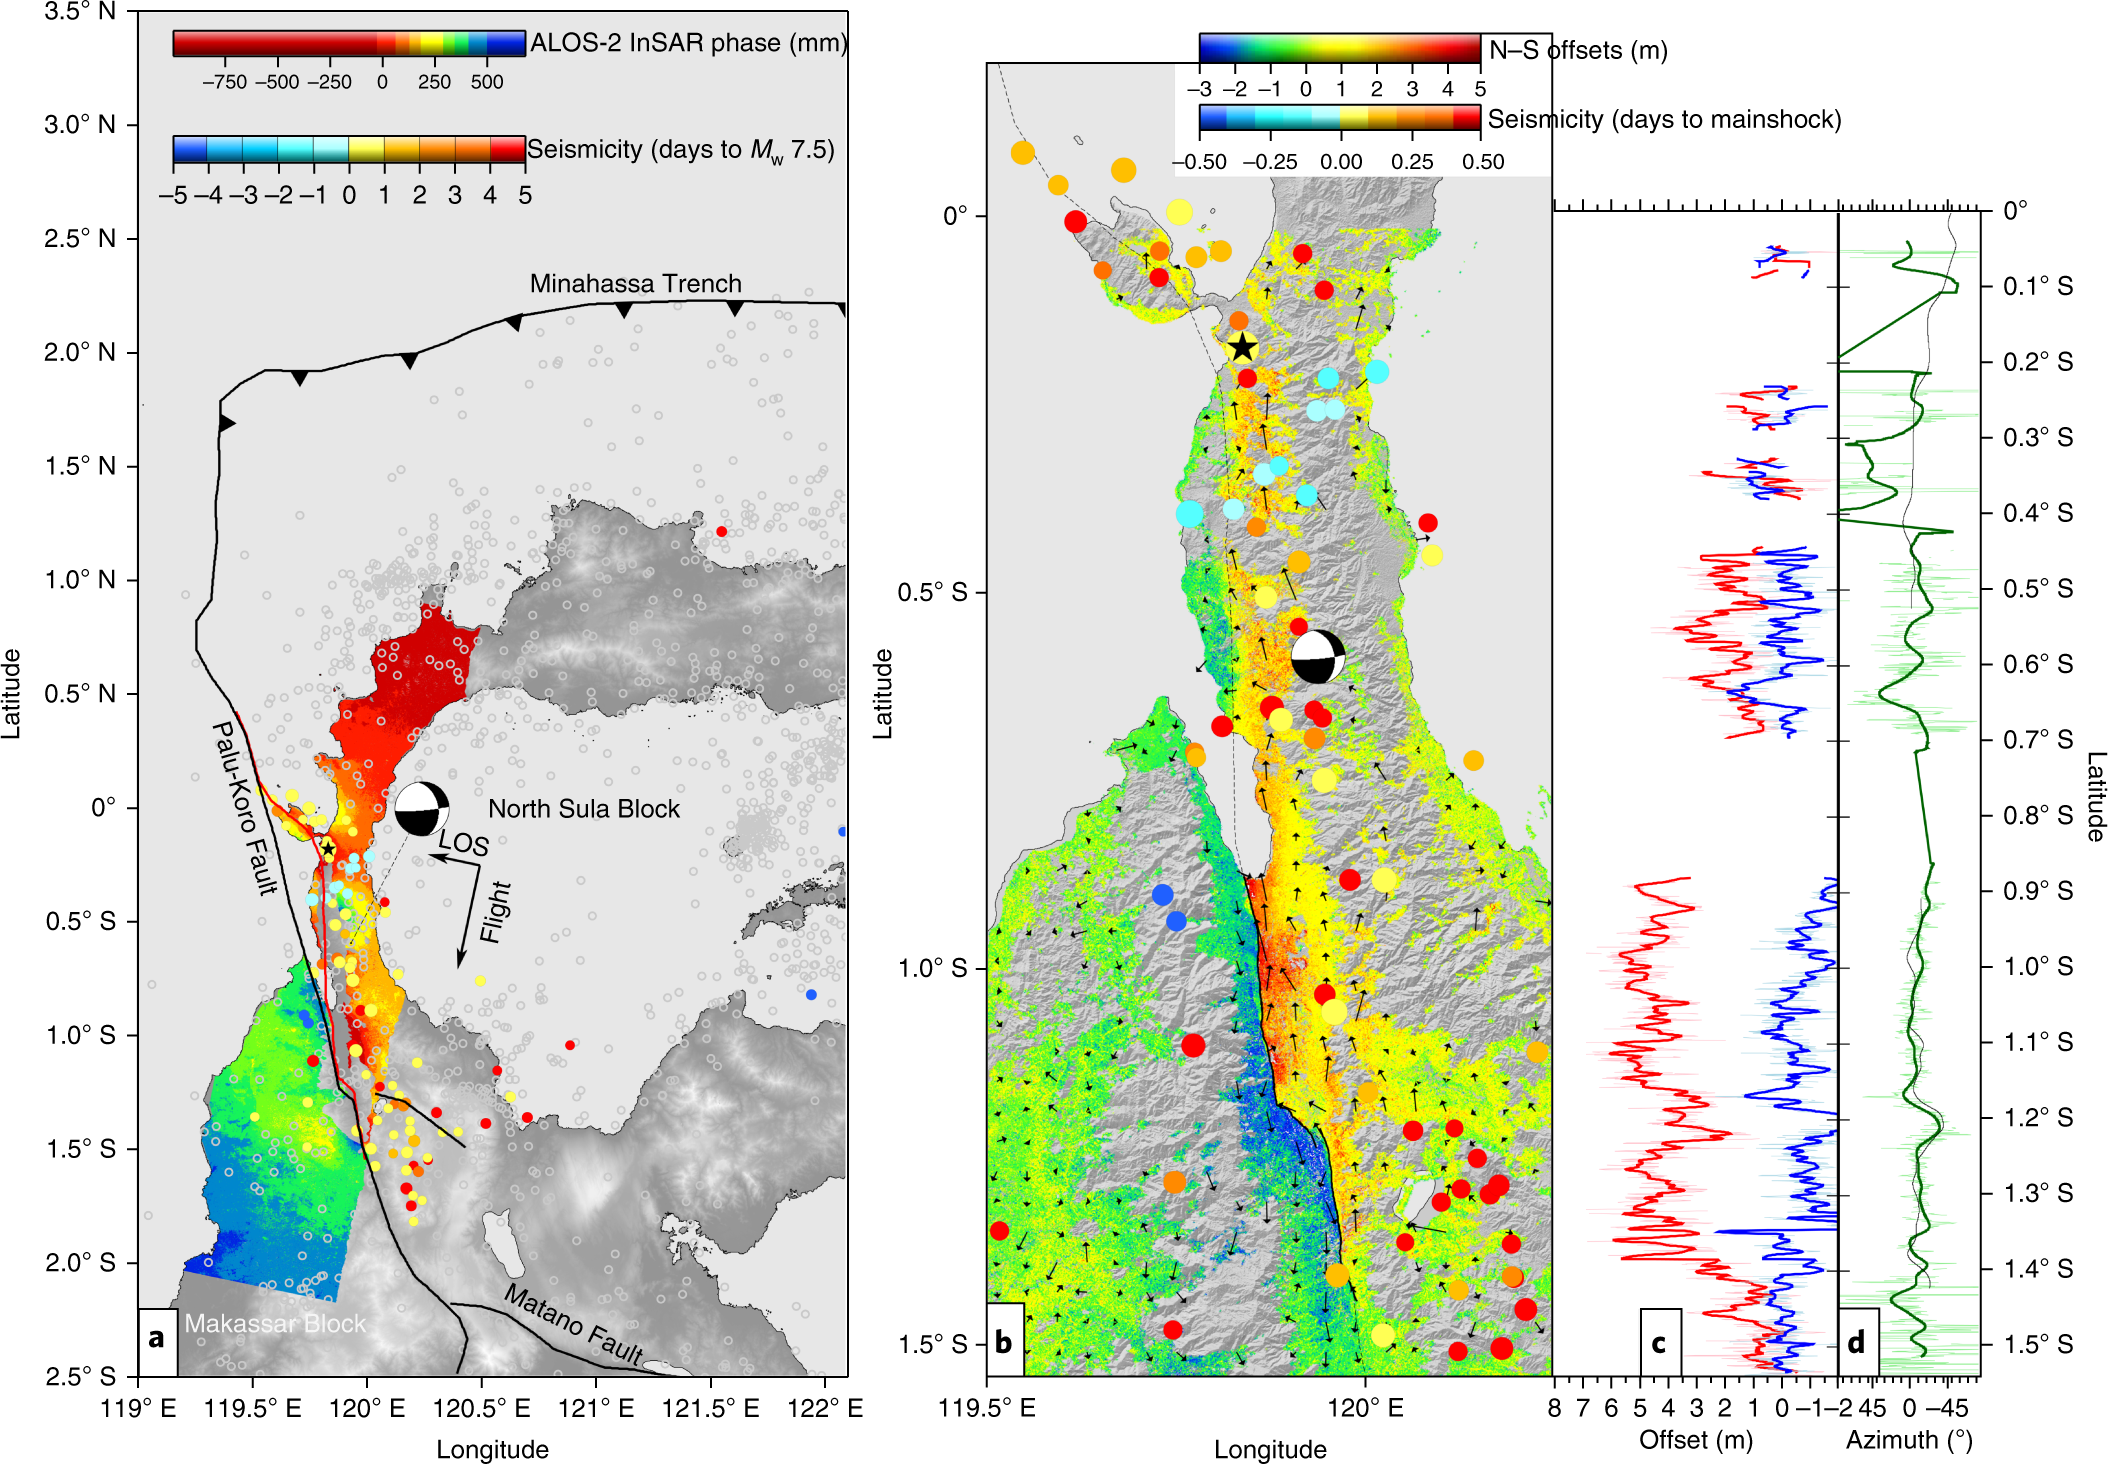 Evidence Of Sup!   ershear During The 2018 Magnitude 7 5 Palu Earthquake - evidence of supershear during the 2018 magnitude 7 5 palu earthquake from space geodesy nature geoscience